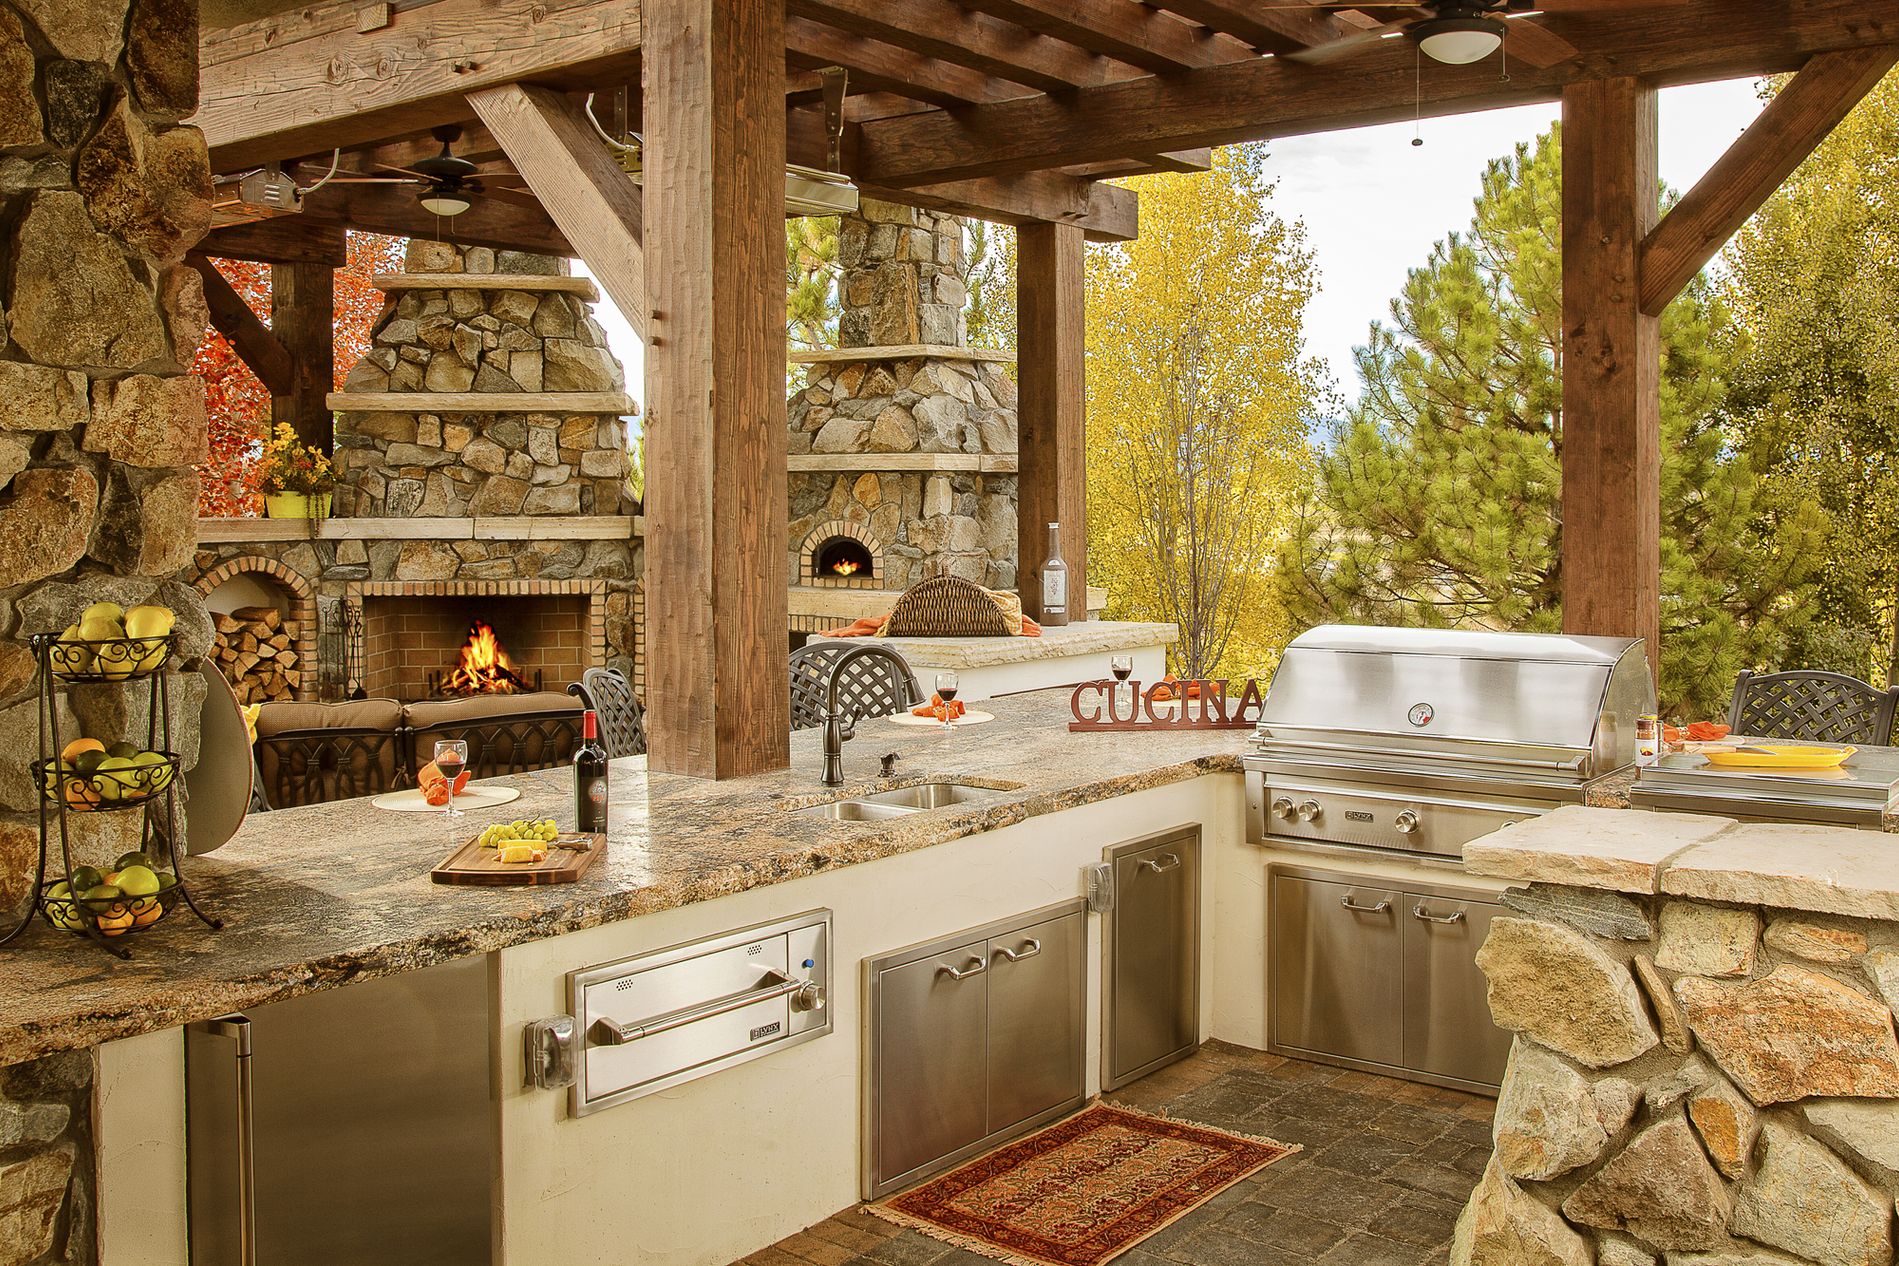 Outdoor Kitchen, fire place, and pizza oven